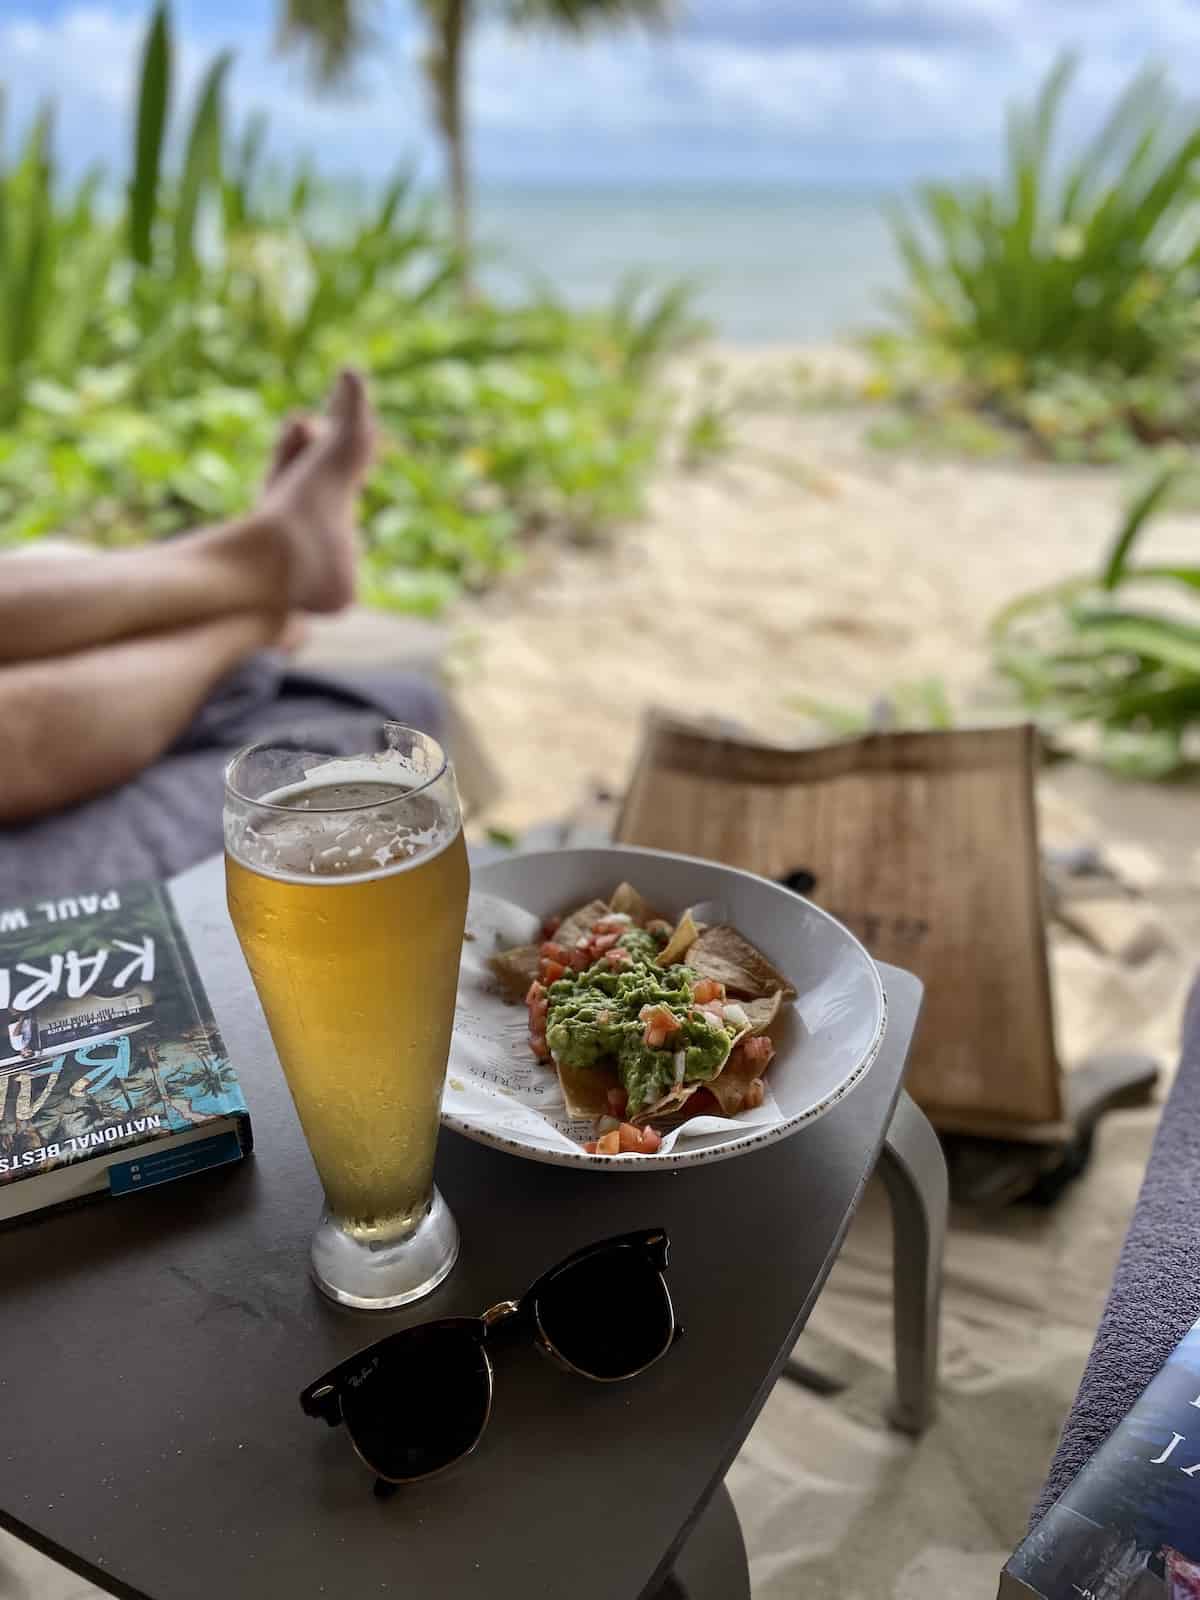 Nachos and beer on table at beach.